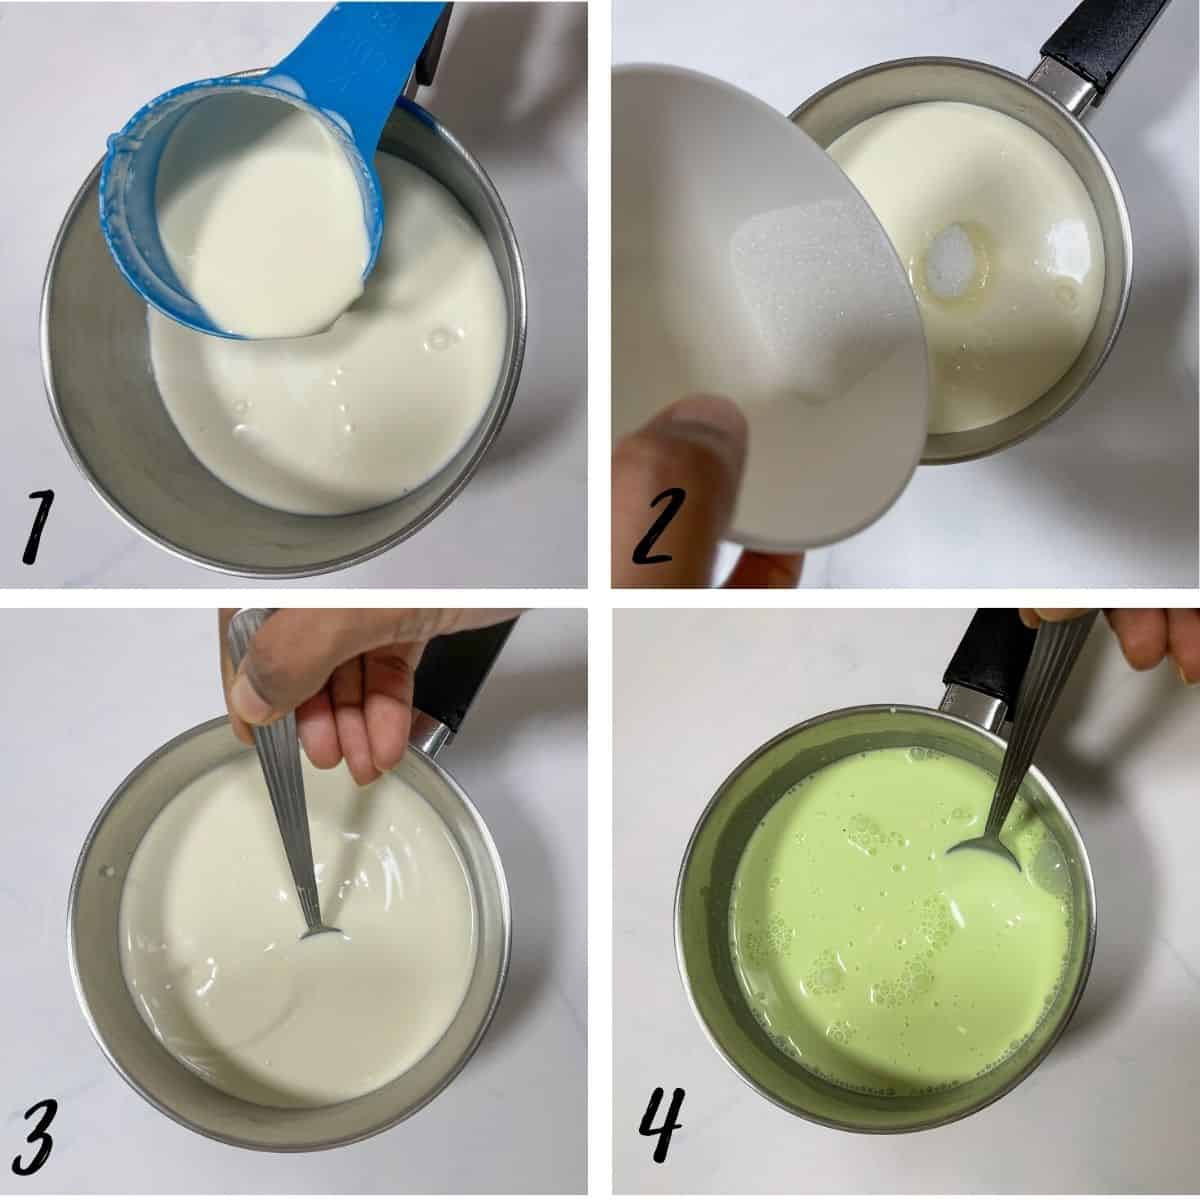 A poster of 4 images showing how to make mint oreo ice cream